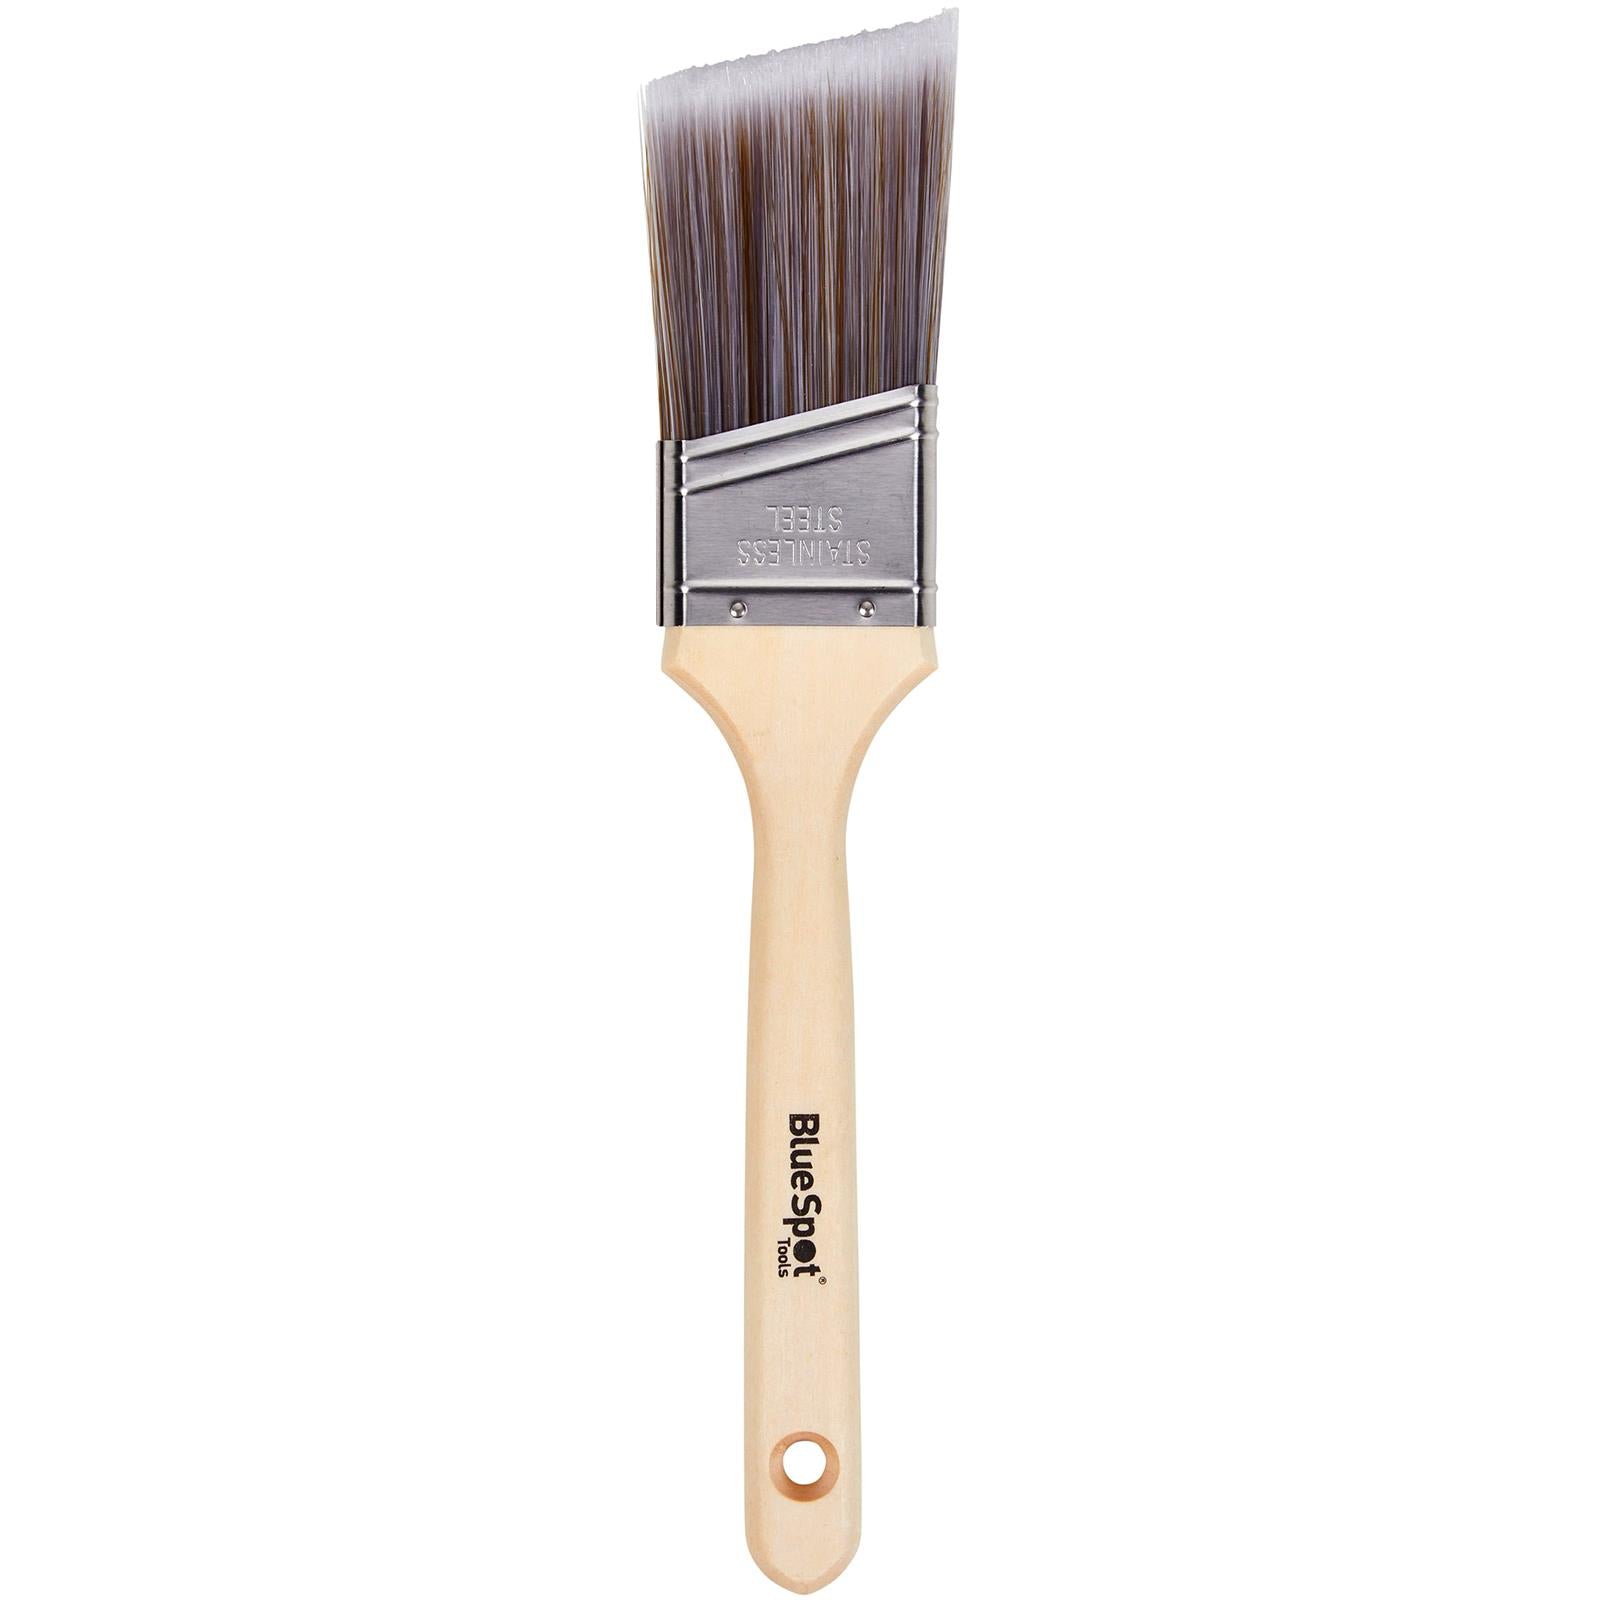 BlueSpot Synthetic Cutting In Paint Brush 2" (50mm)